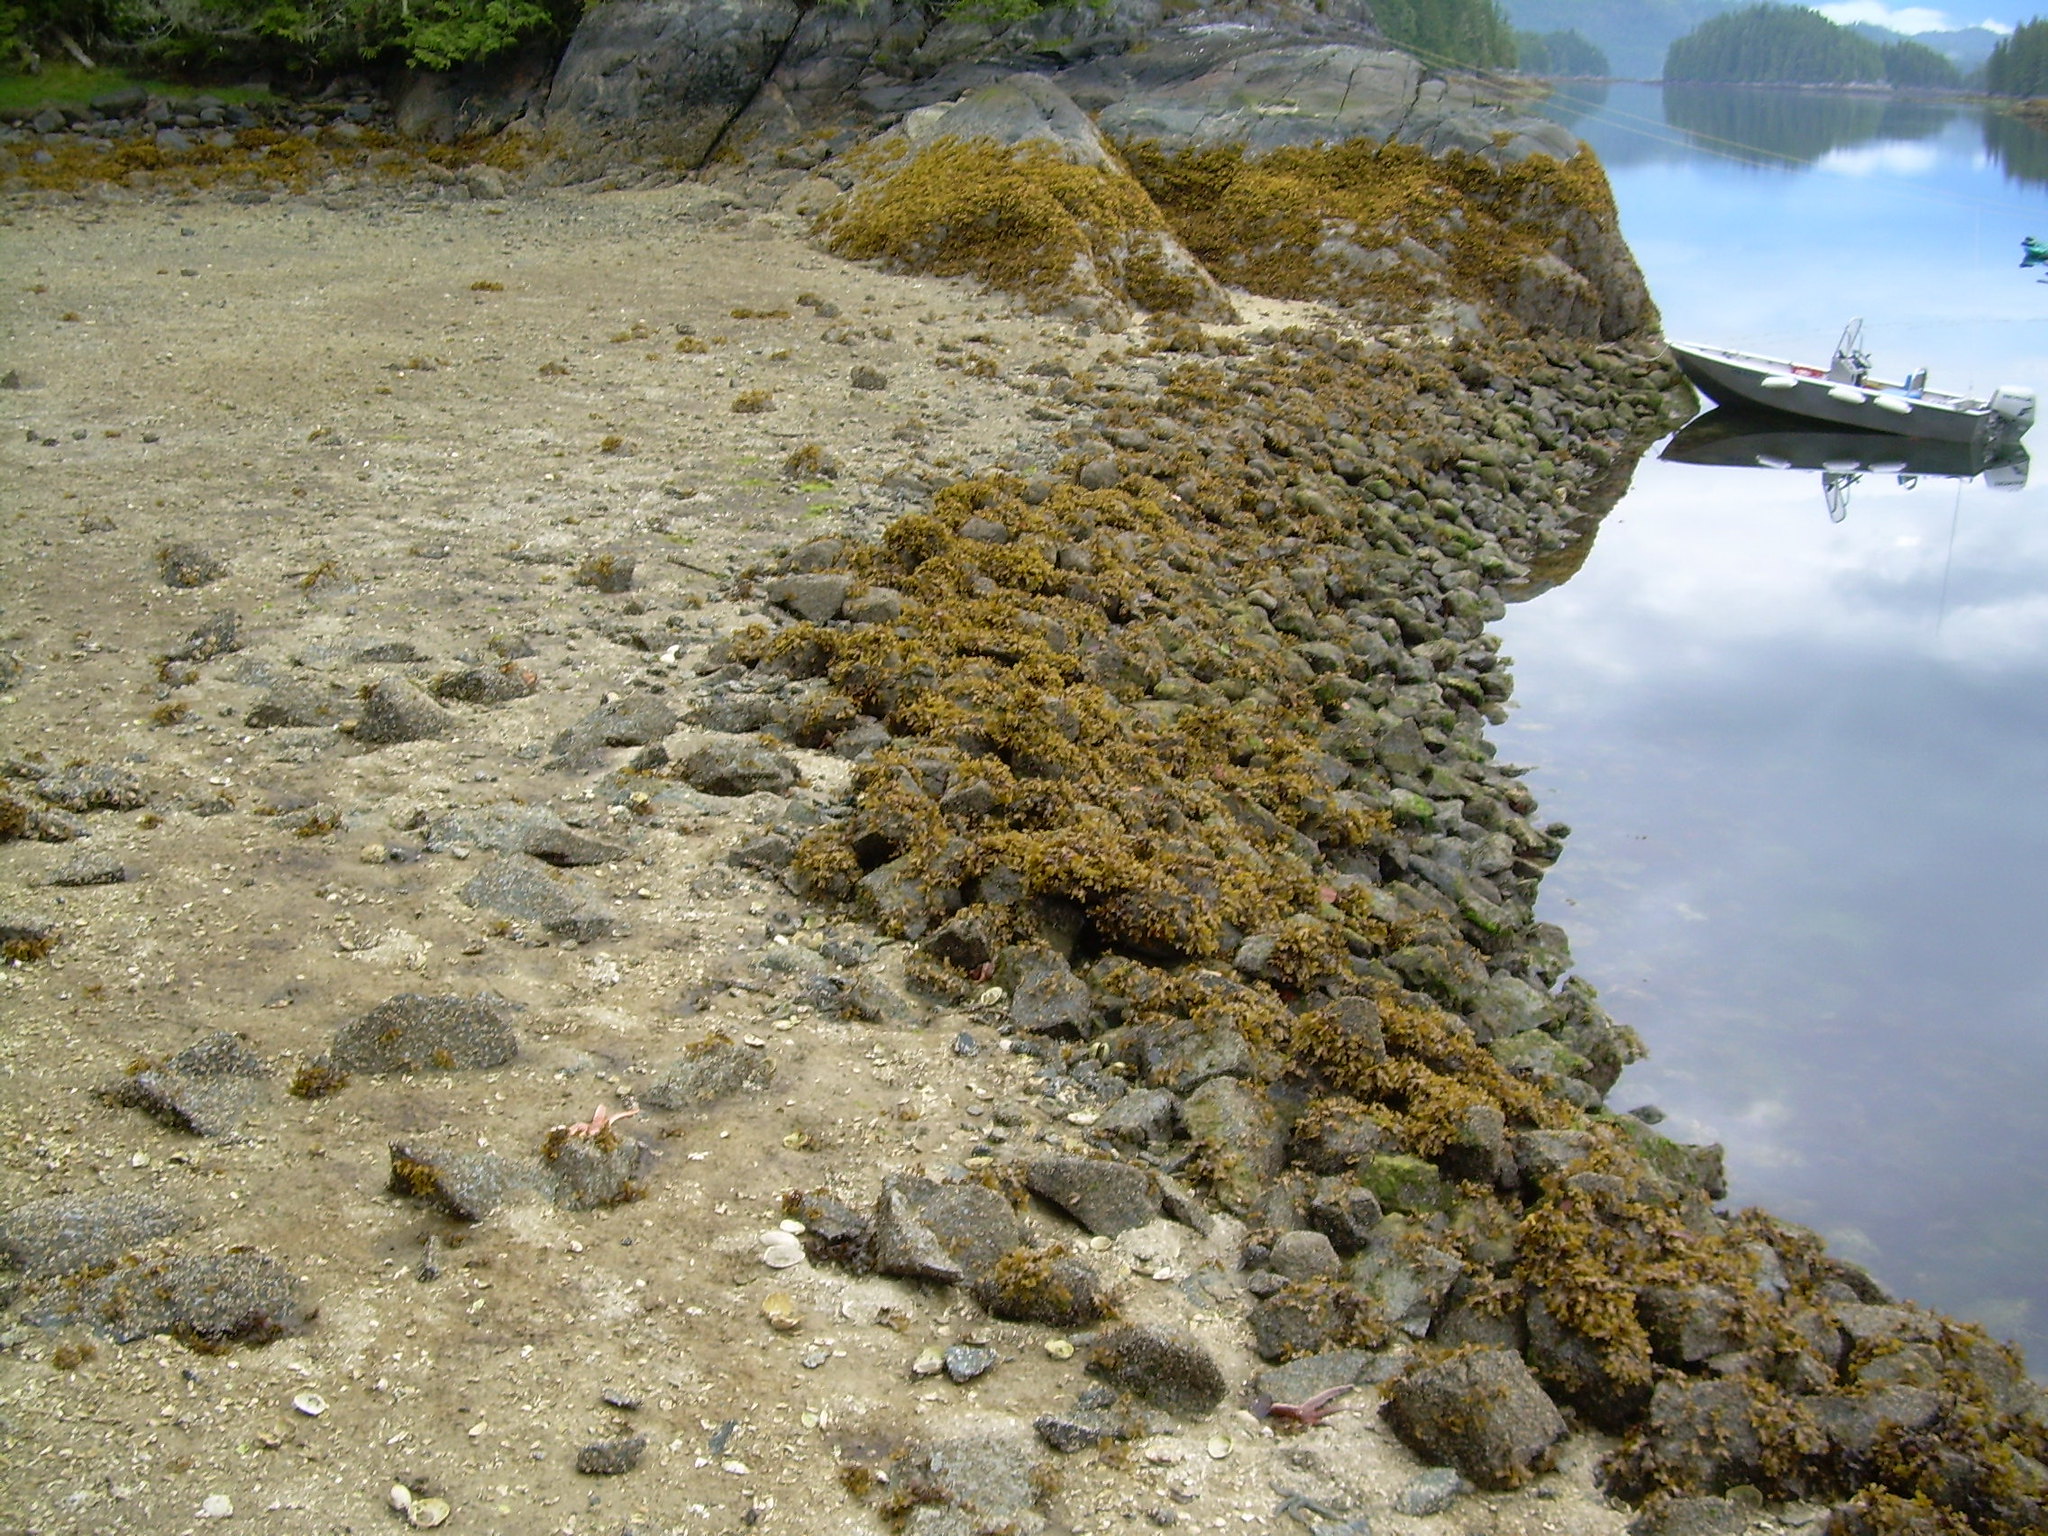 Clam garden in the Broughton Archipelago. Note how the lower intertidal zone rock wall has created a terrace of shell hash in the mid-intertidal, creating productive clam habitat in a location where there wasn’t even a beach before.